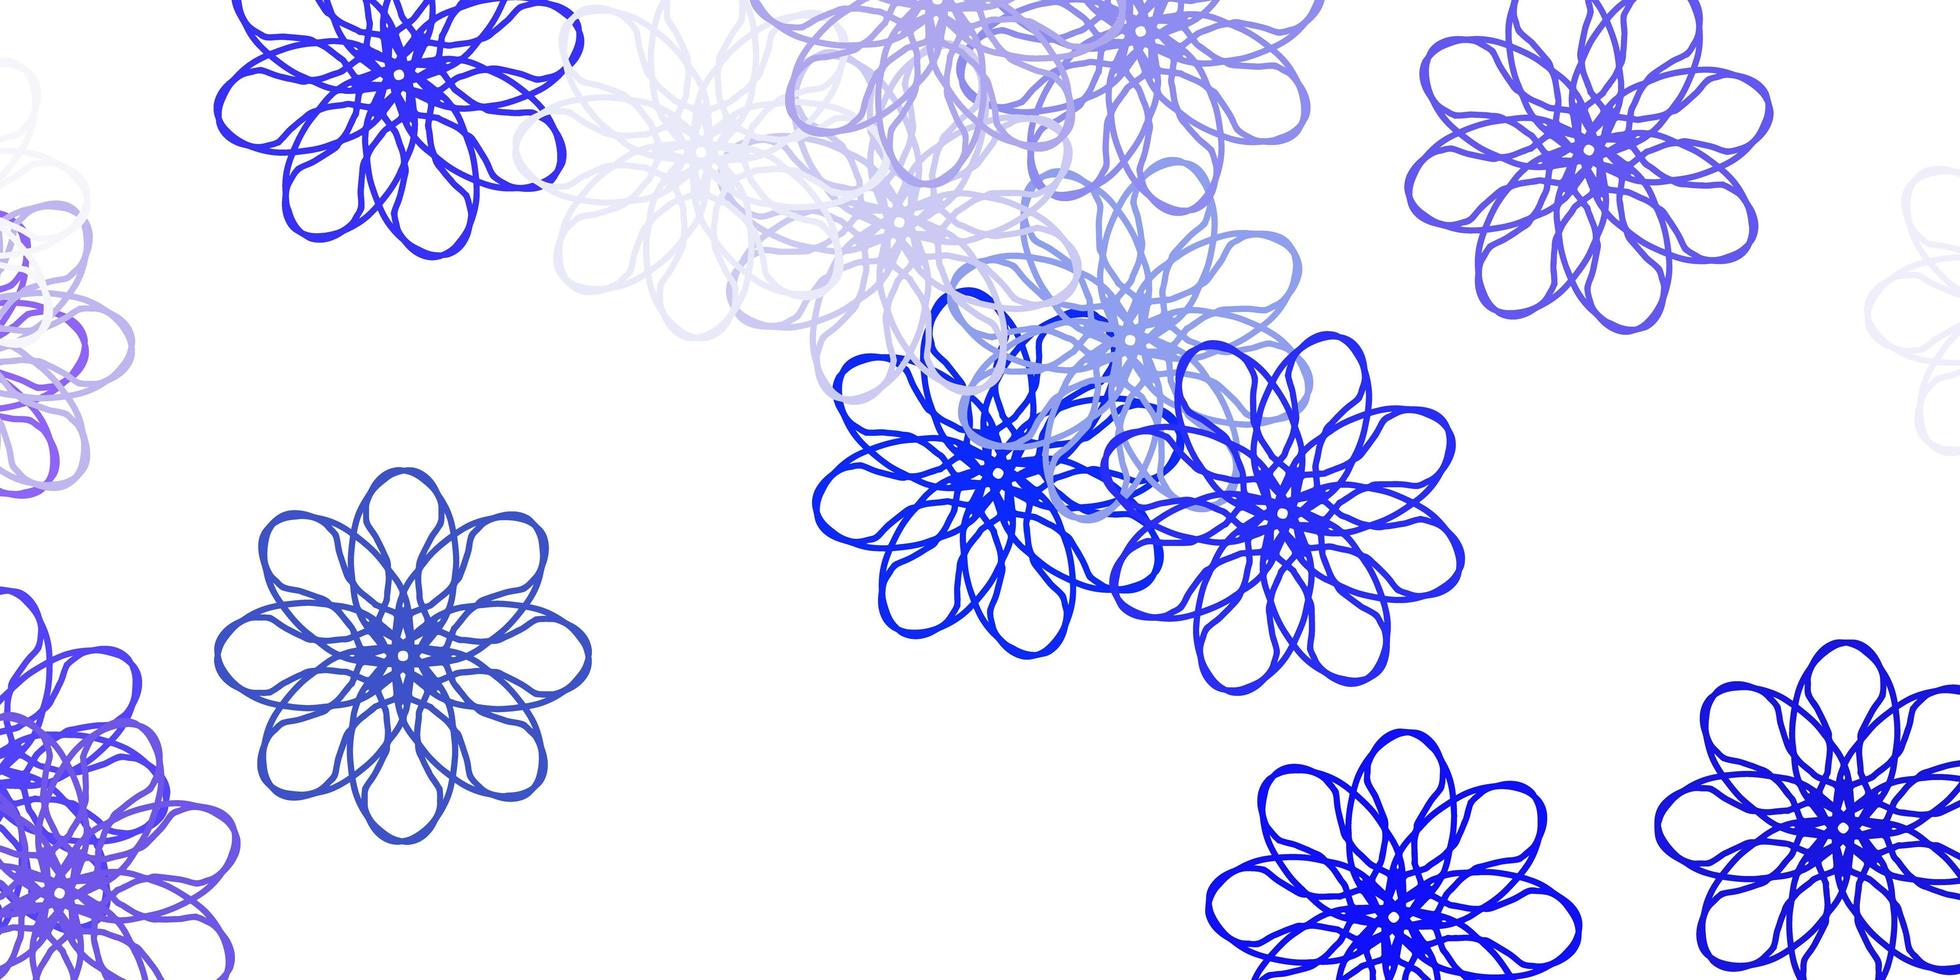 Light Purple vector doodle pattern with flowers